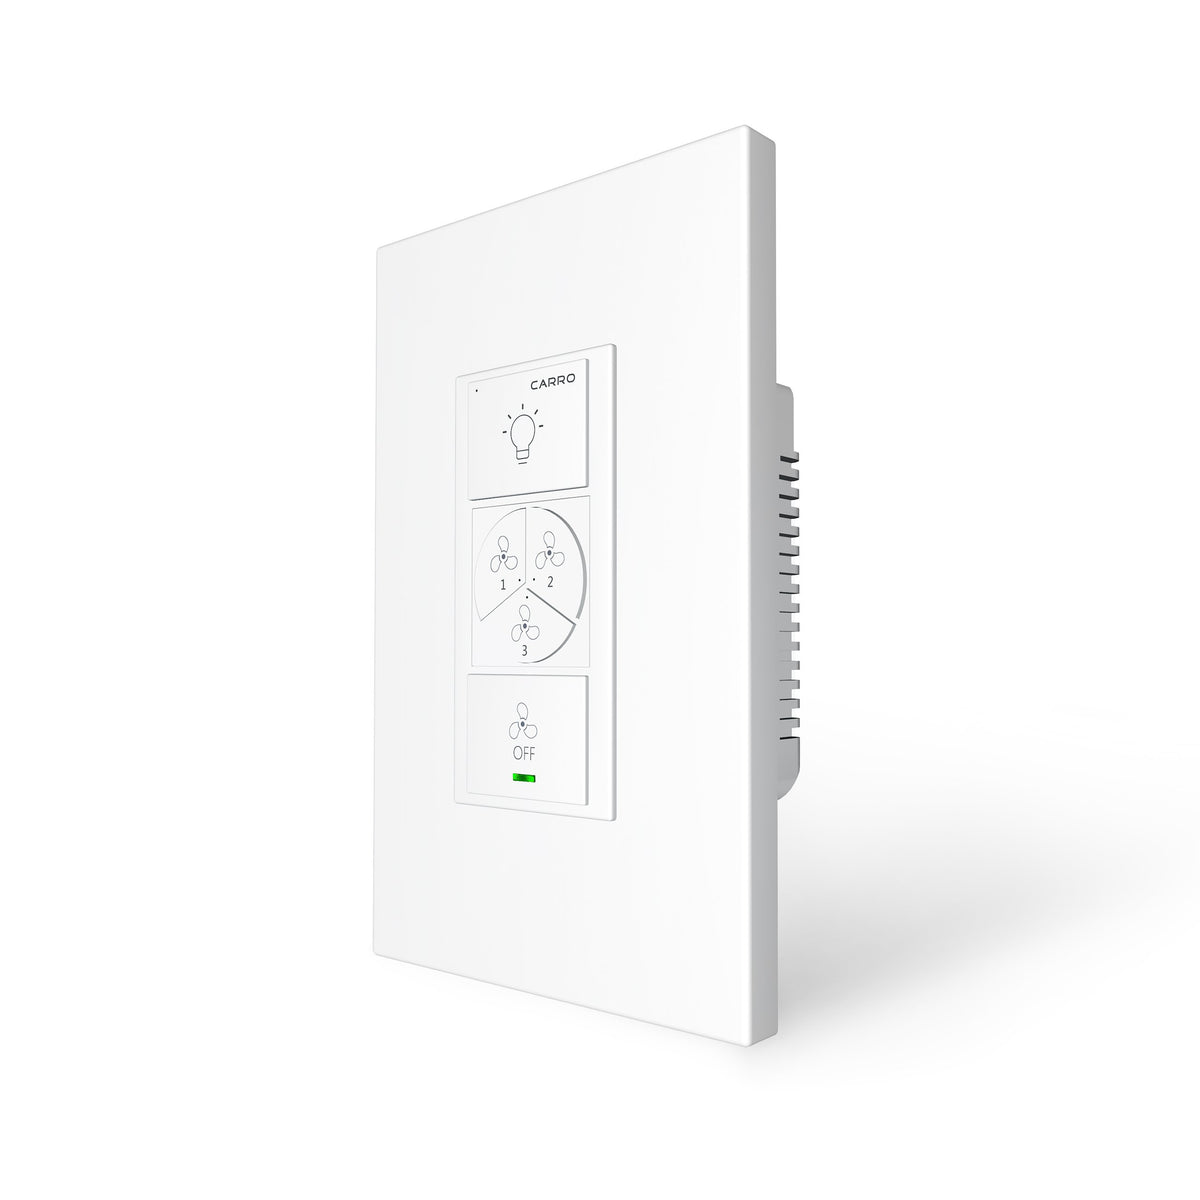 Pilot Best Smart Wall Switch For Ceiling Fans(1-Gang), Google Assistant, and Siri Shortcuts, Works with Amazon Alexa